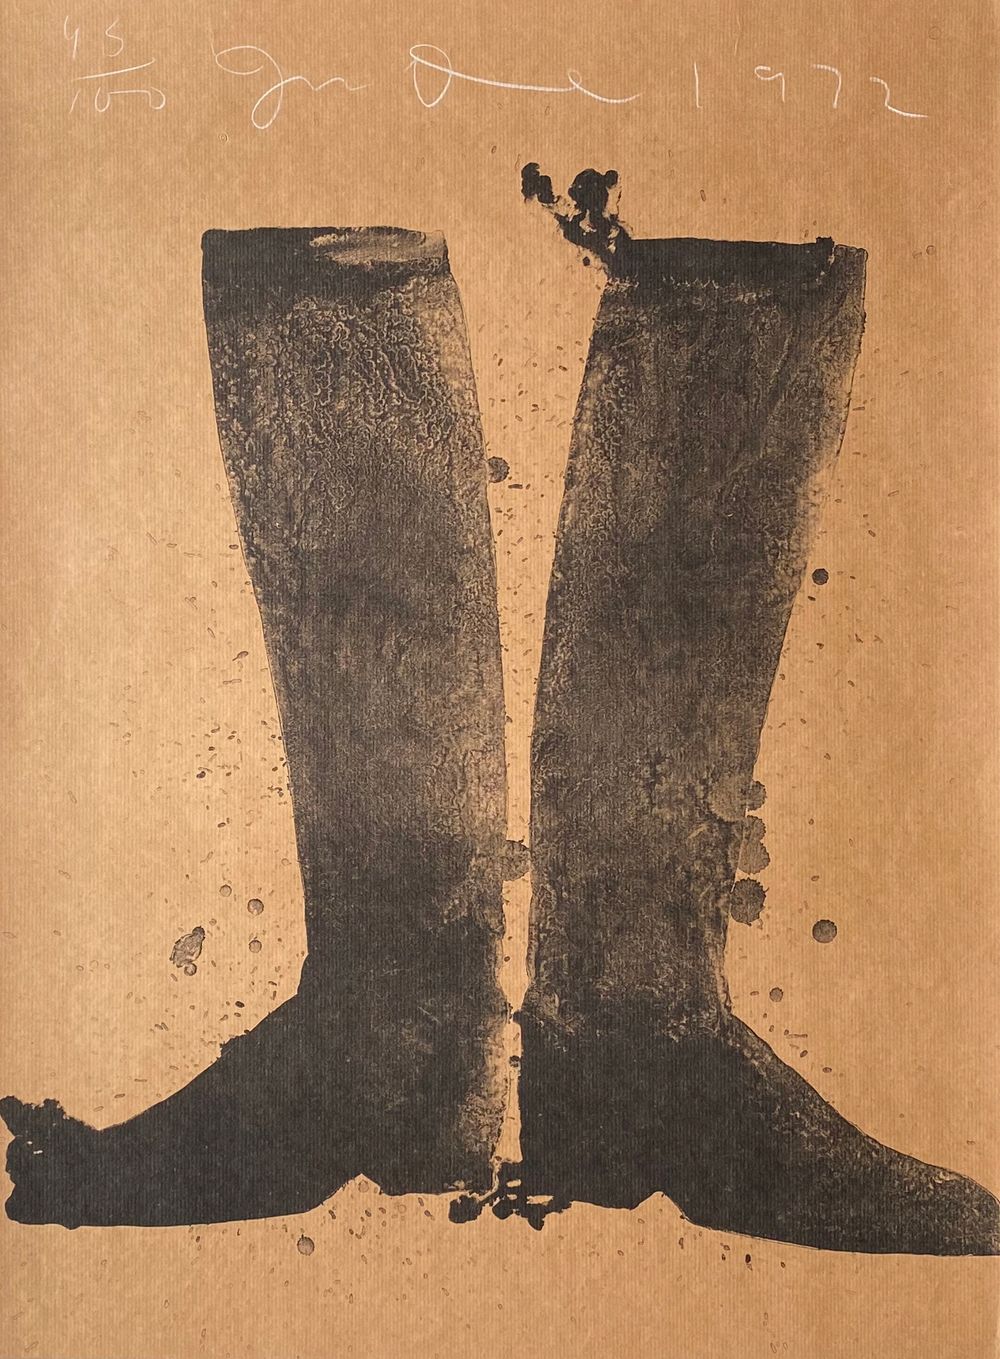 Silhouette black boots on brown paper